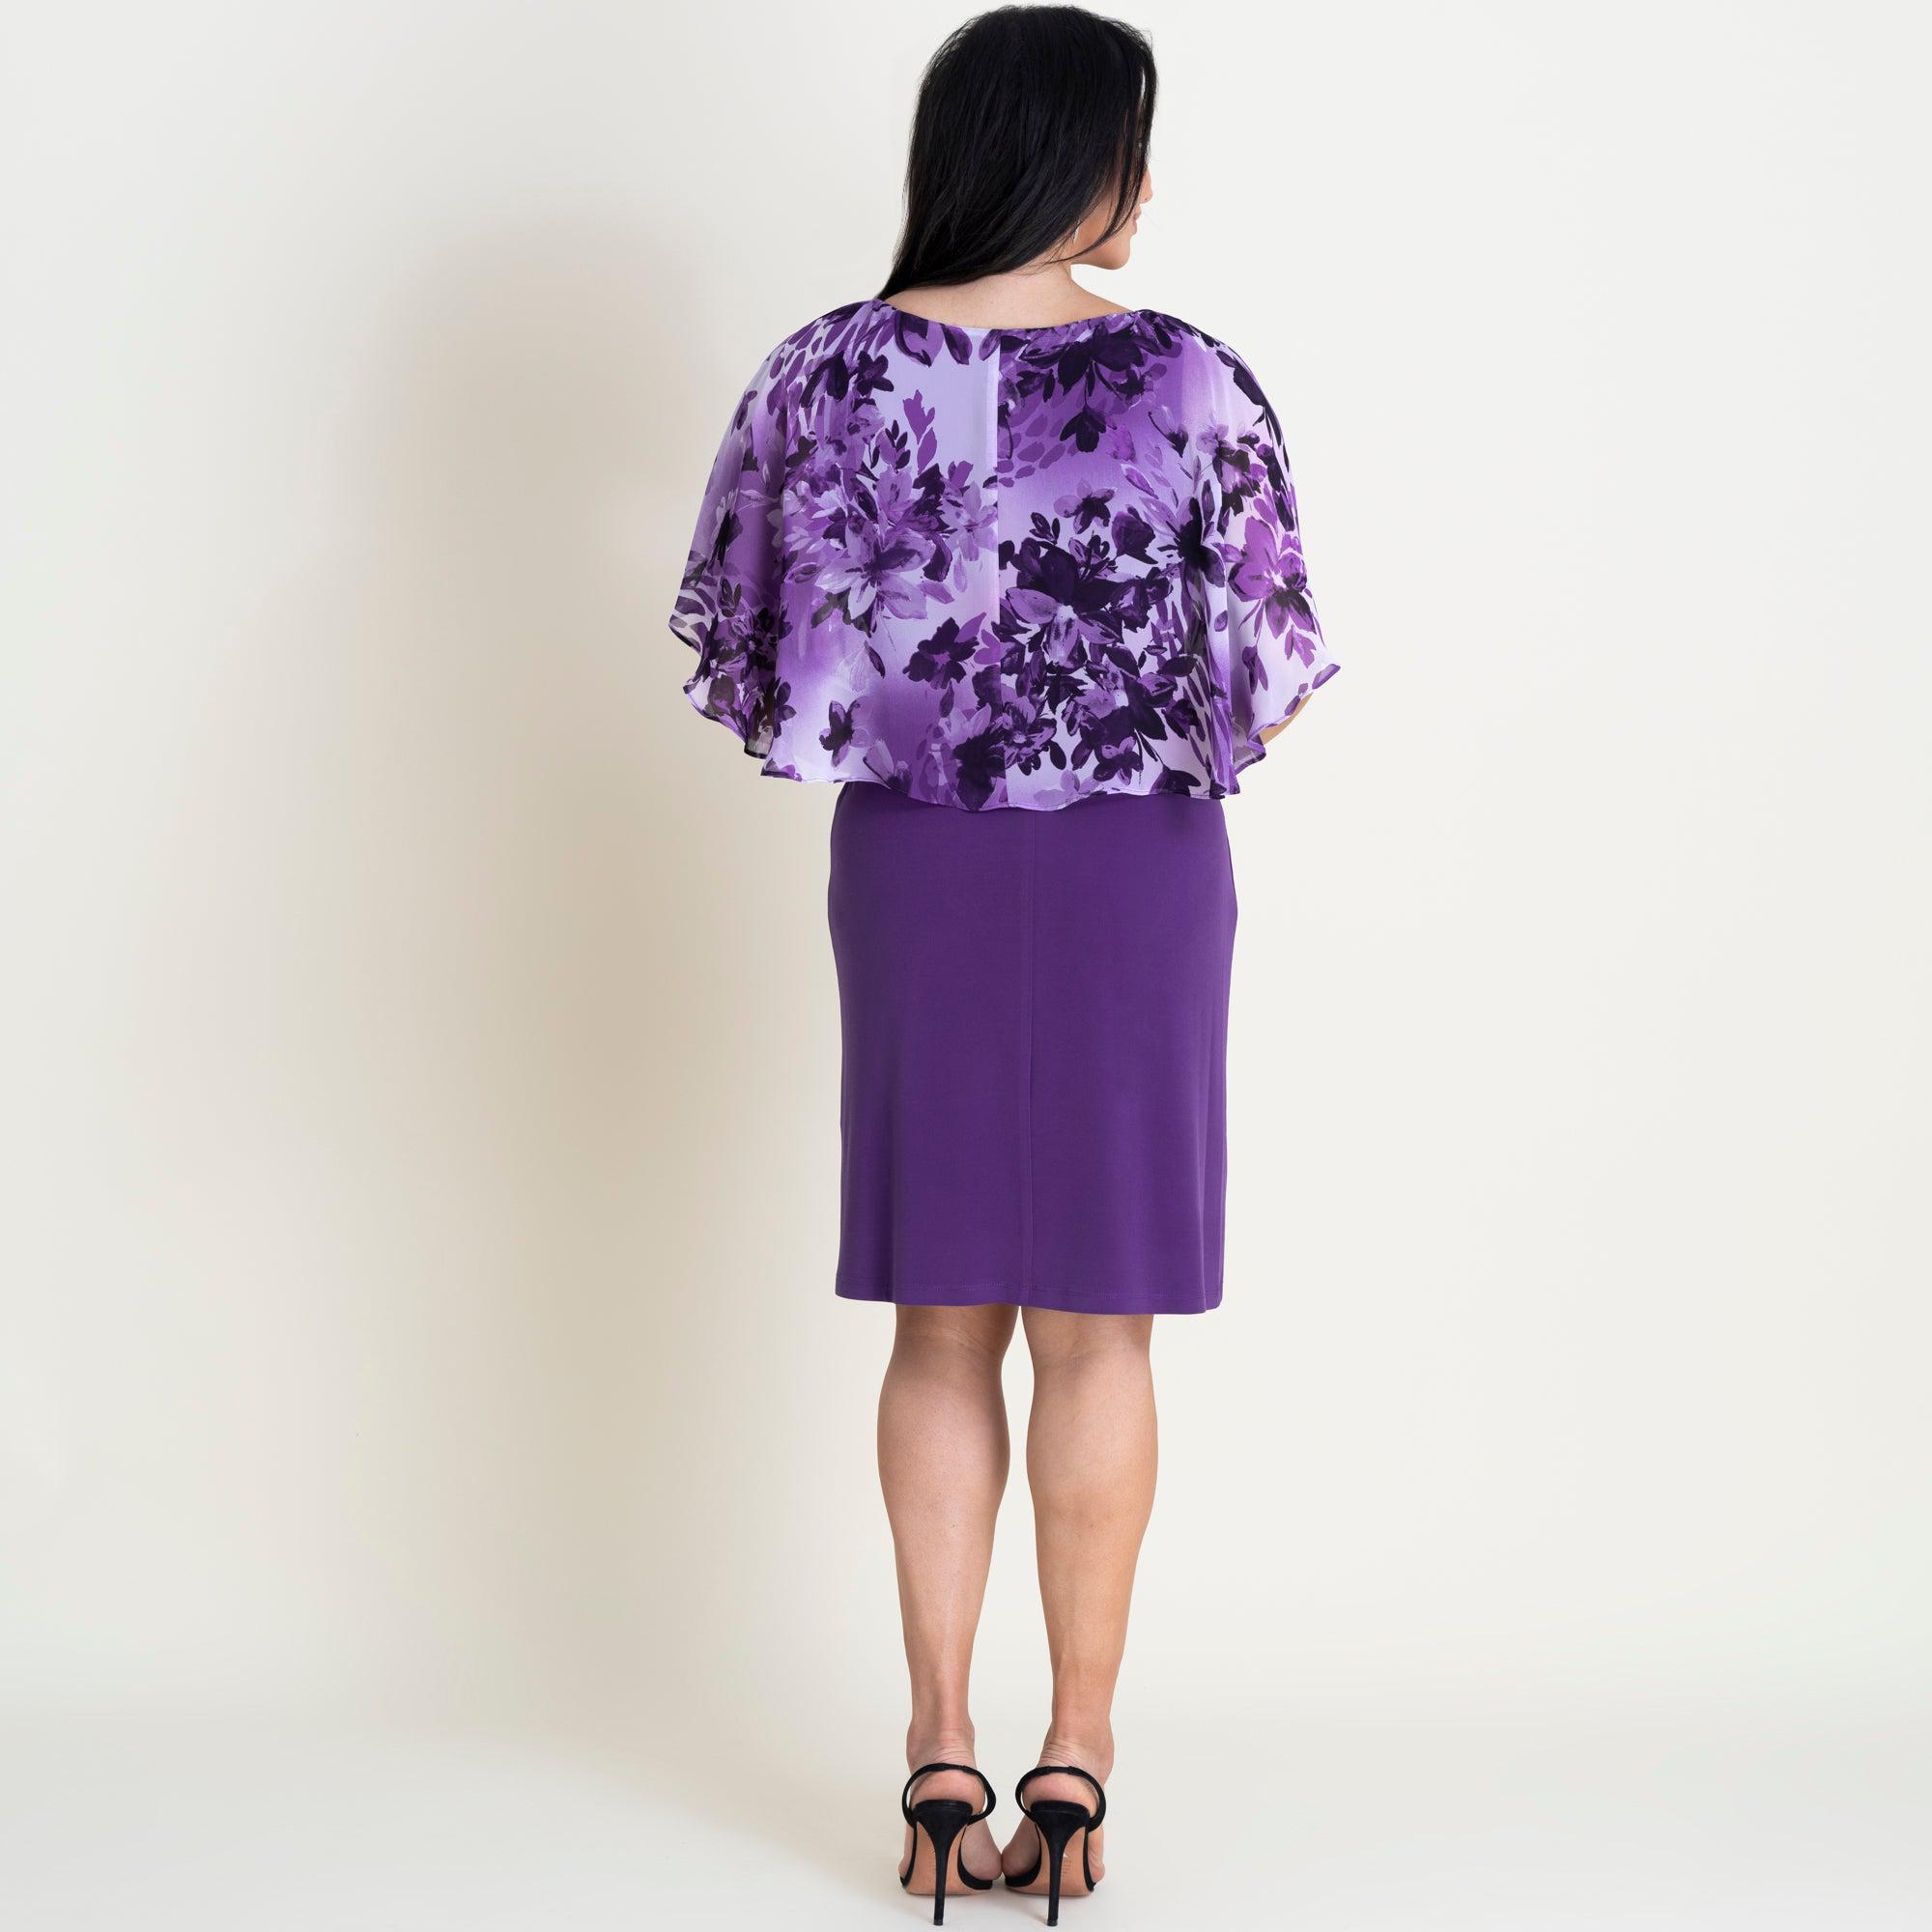 Woman posing wearing Purple Alyssa Purple Floral Cape Dress from Connected Apparel